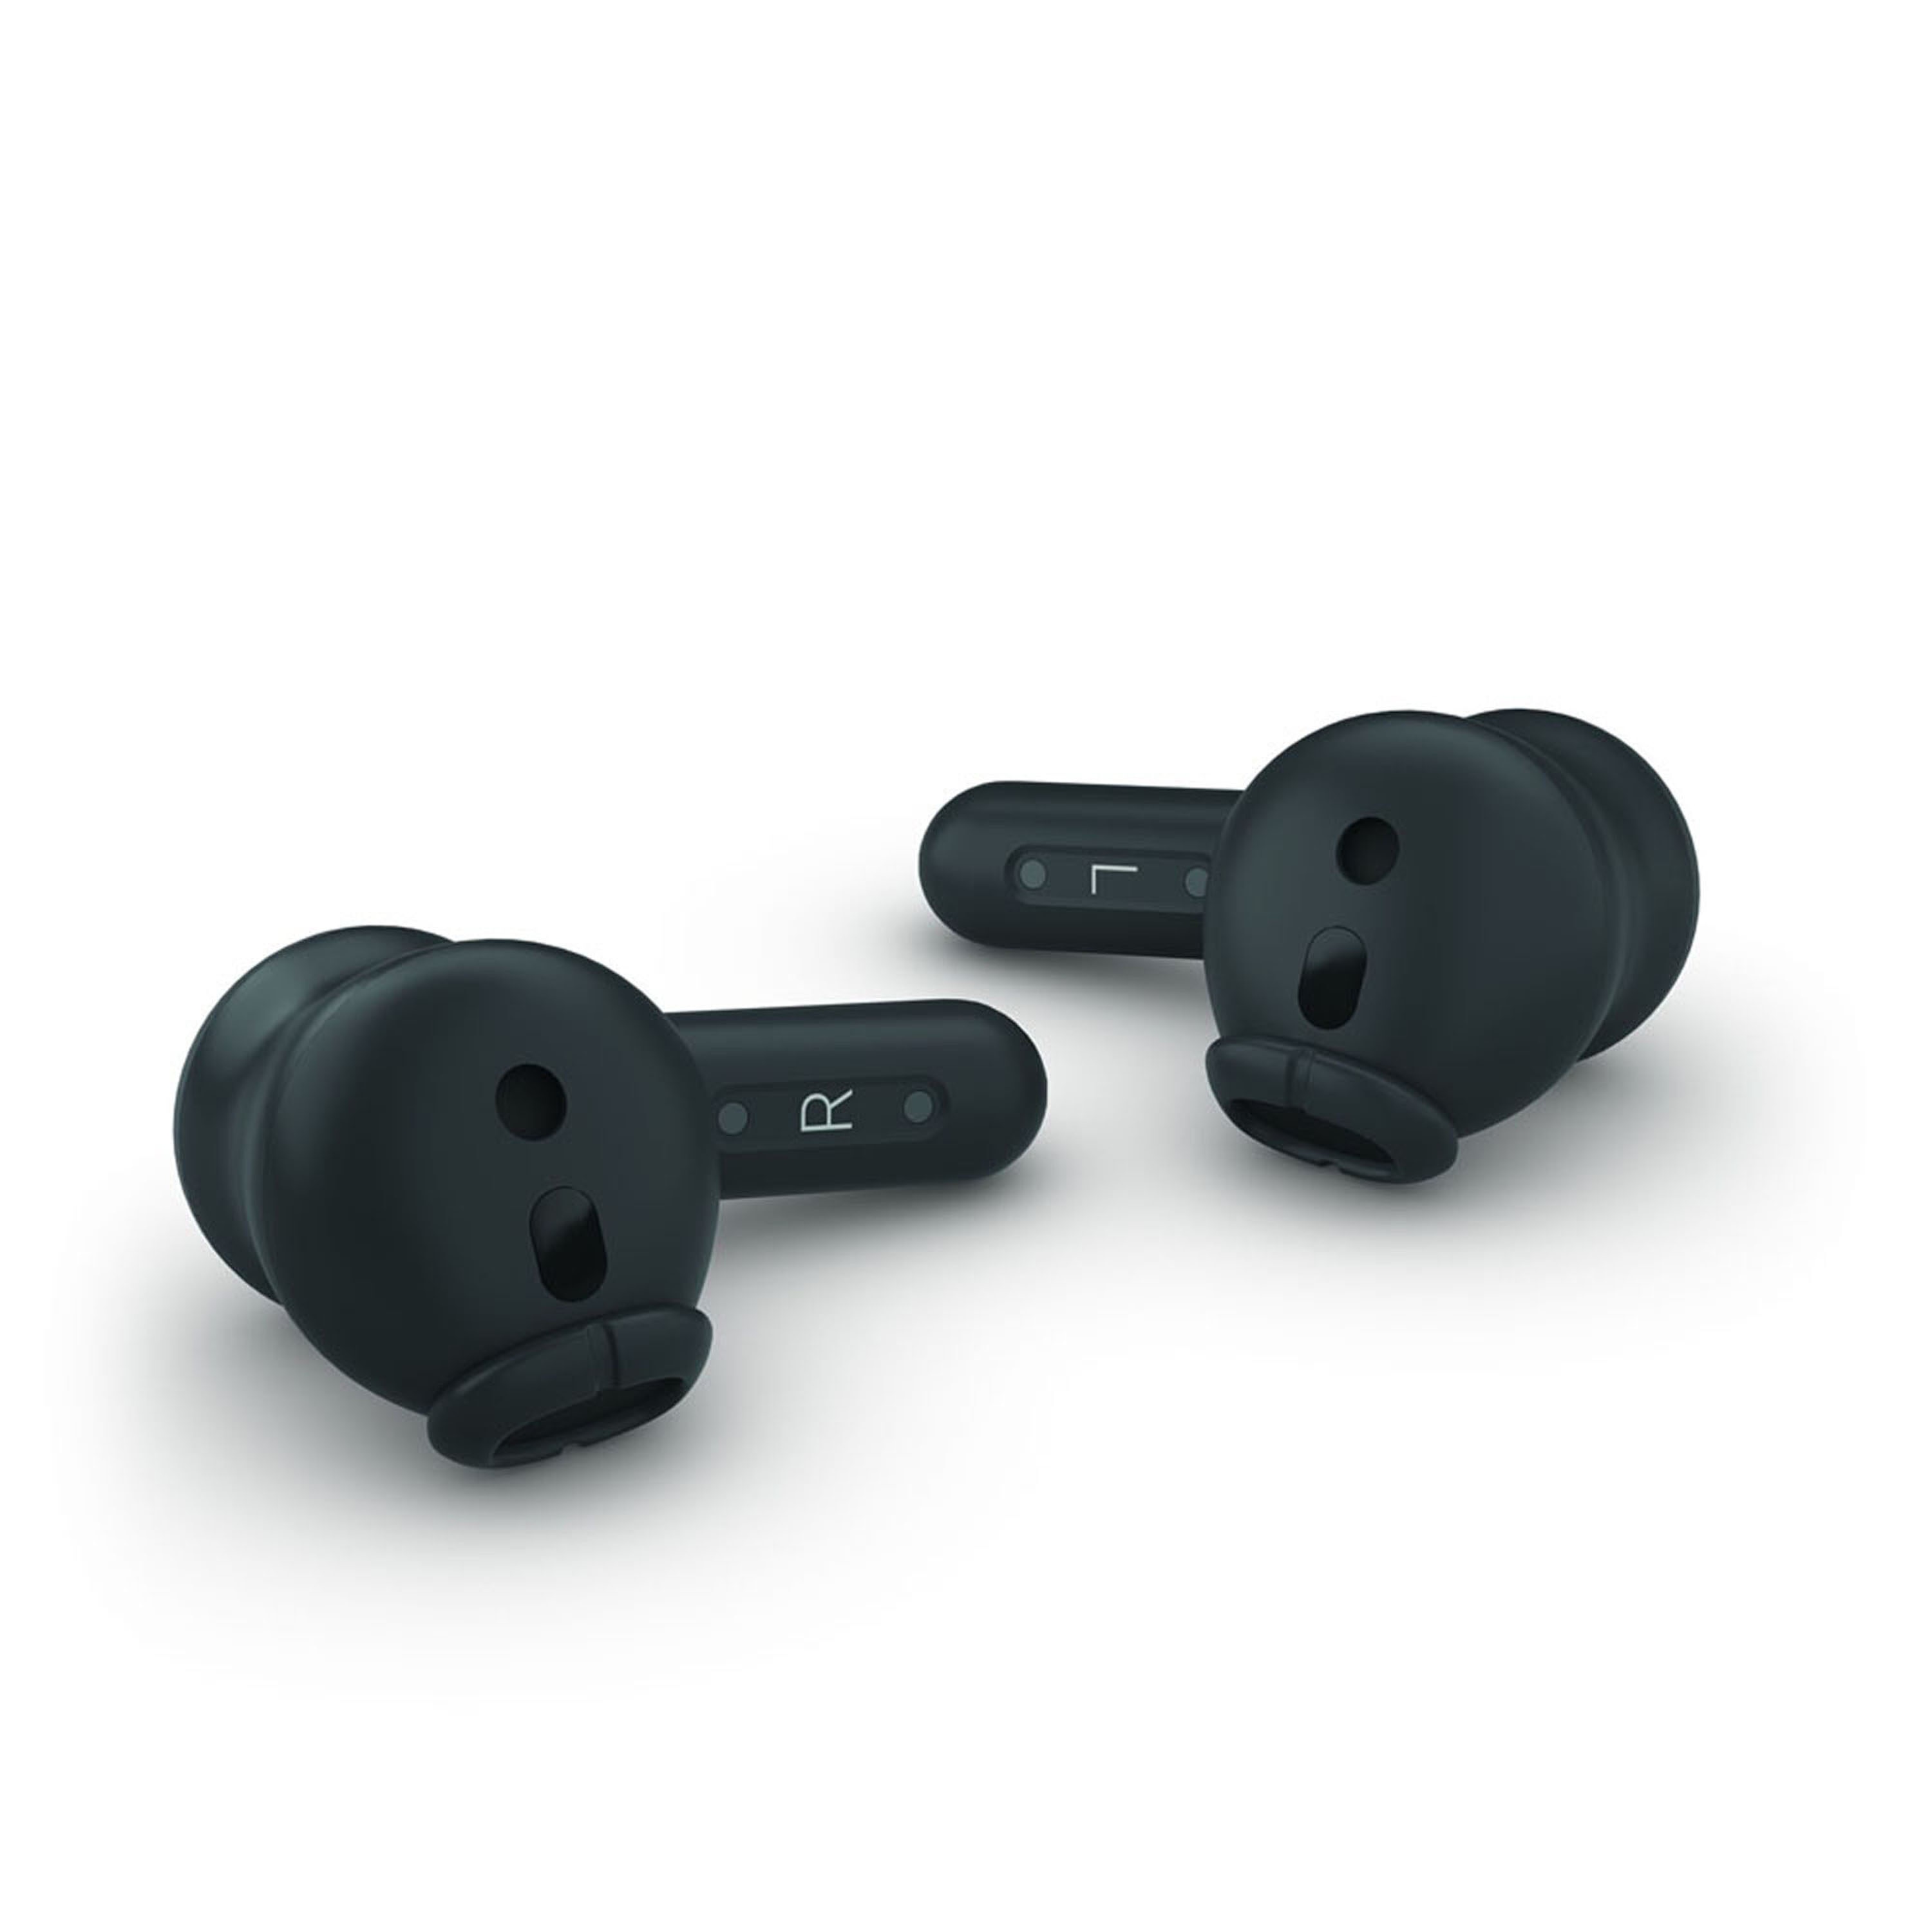 s New Echo Buds Have 2 Key Features That Other Cheap Earbuds Lack -  CNET